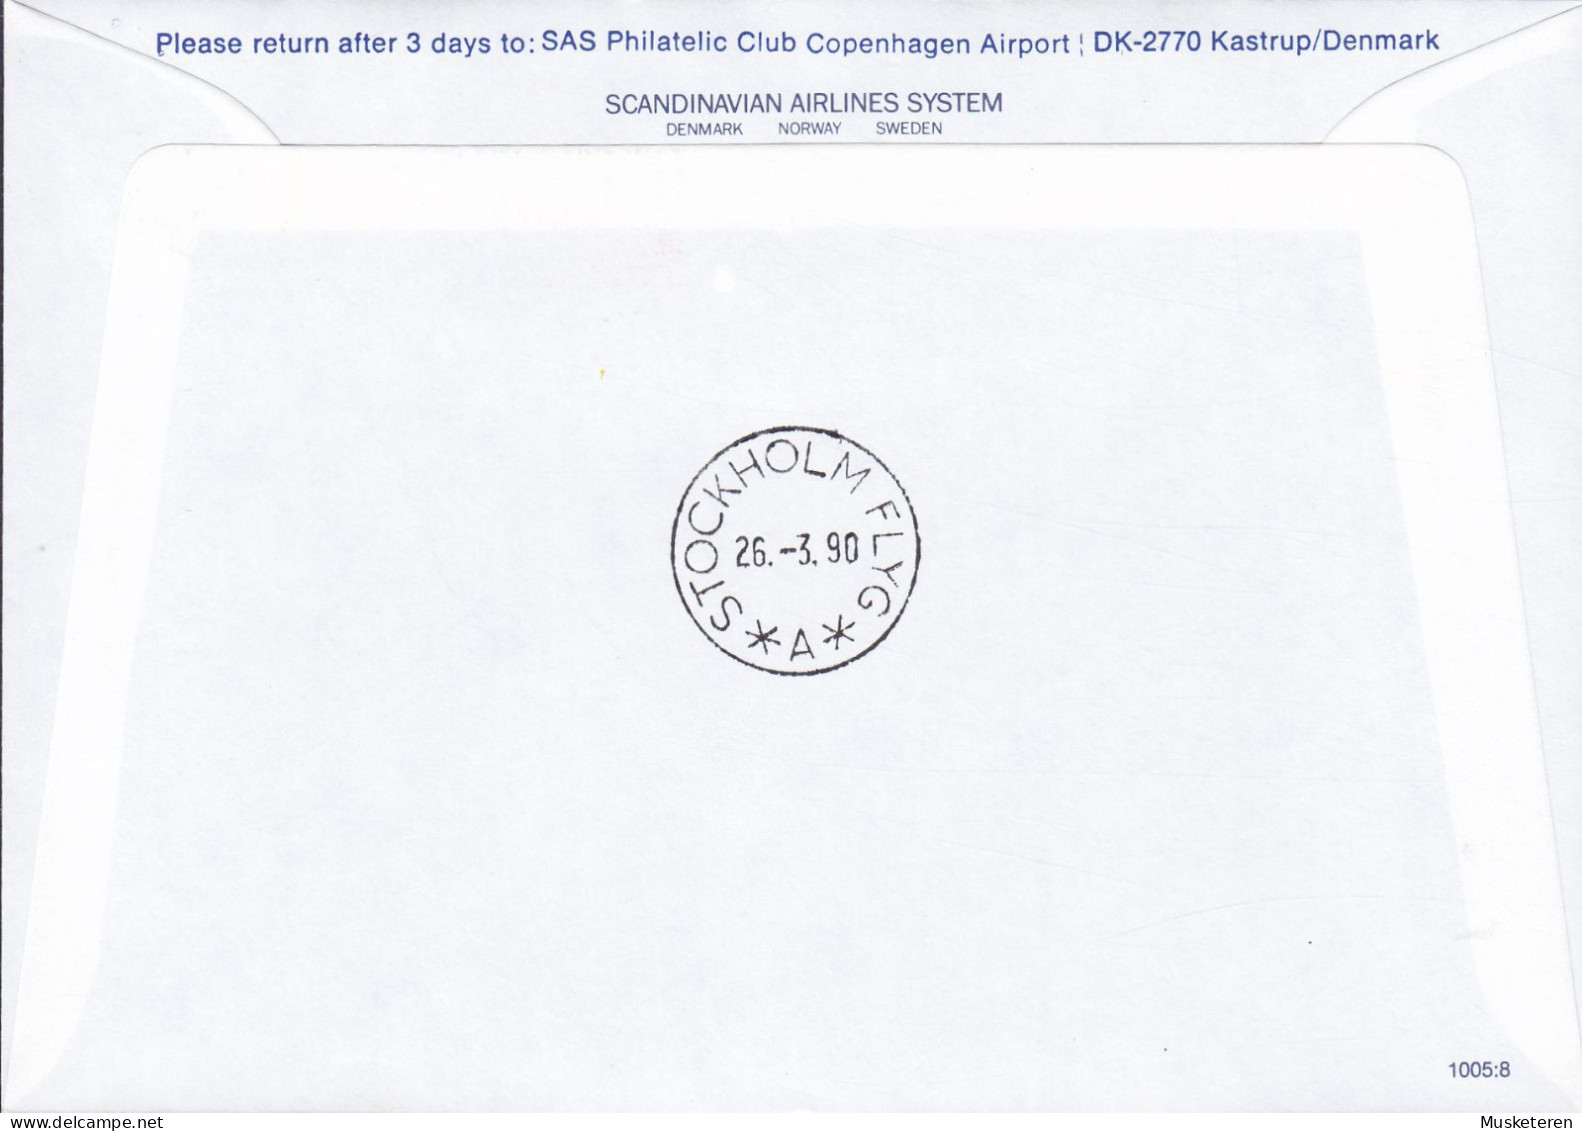 Finland SAS First DC-9 Flight TAMPERE-STOCKHOLM, TAMPERE 1990 Cover Brief Lettre Europa CEPT Stamp - Lettres & Documents